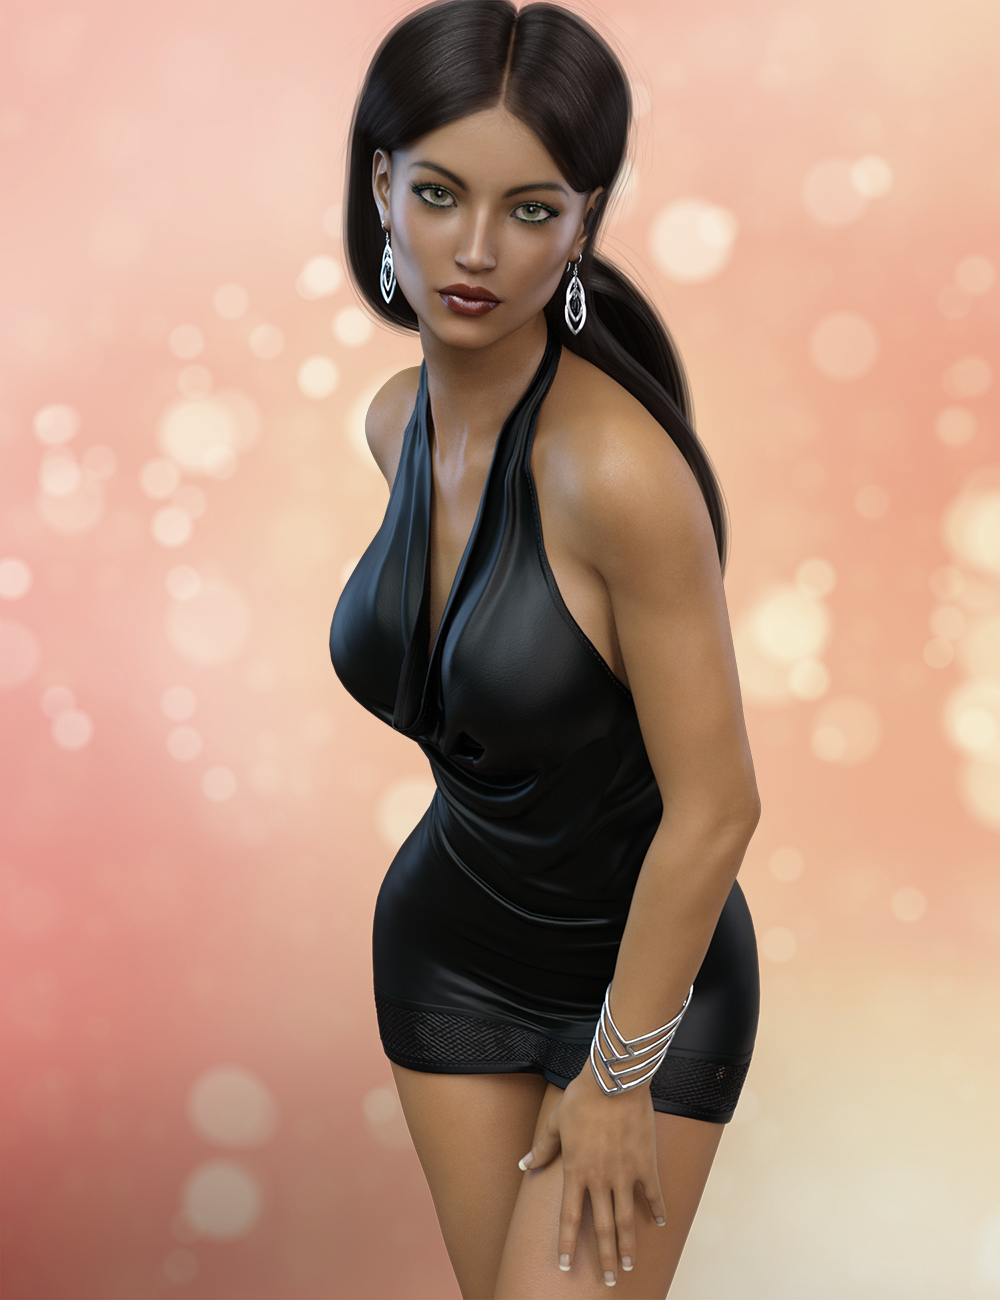 FWSA Cadence HD for Victoria 7 by: Fred Winkler ArtSabby, 3D Models by Daz 3D